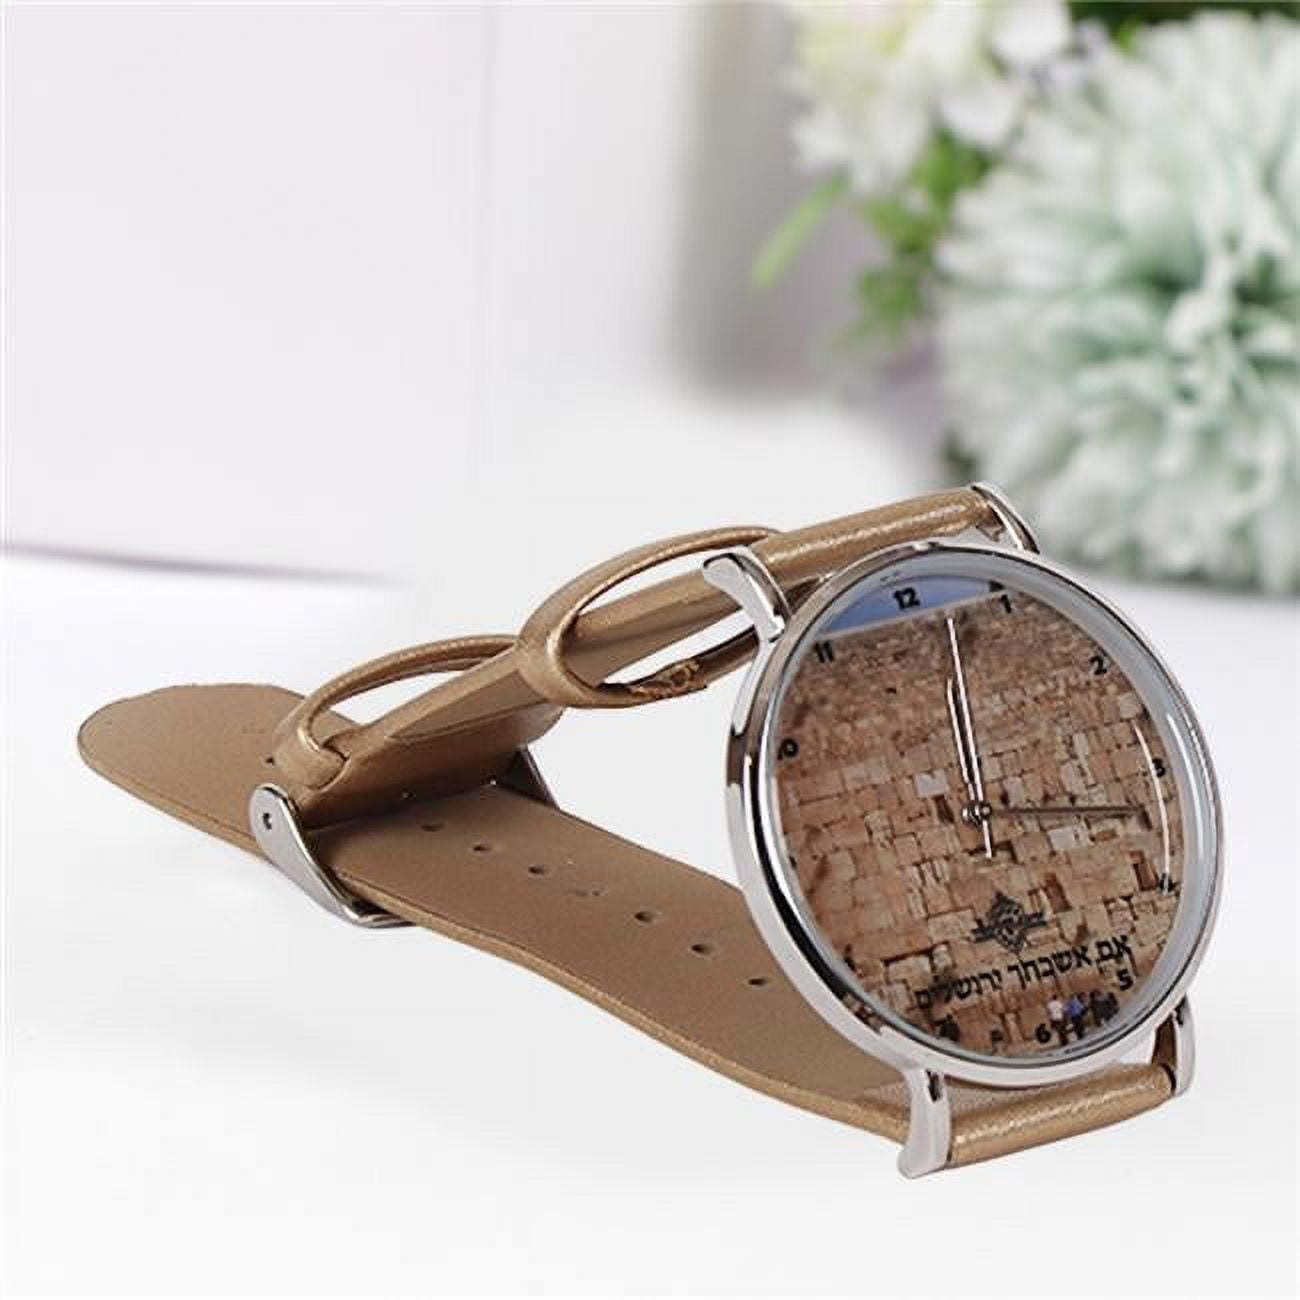 Picture of Nua 59987 Beige Handle Kotel Face Watch with Silver Rim